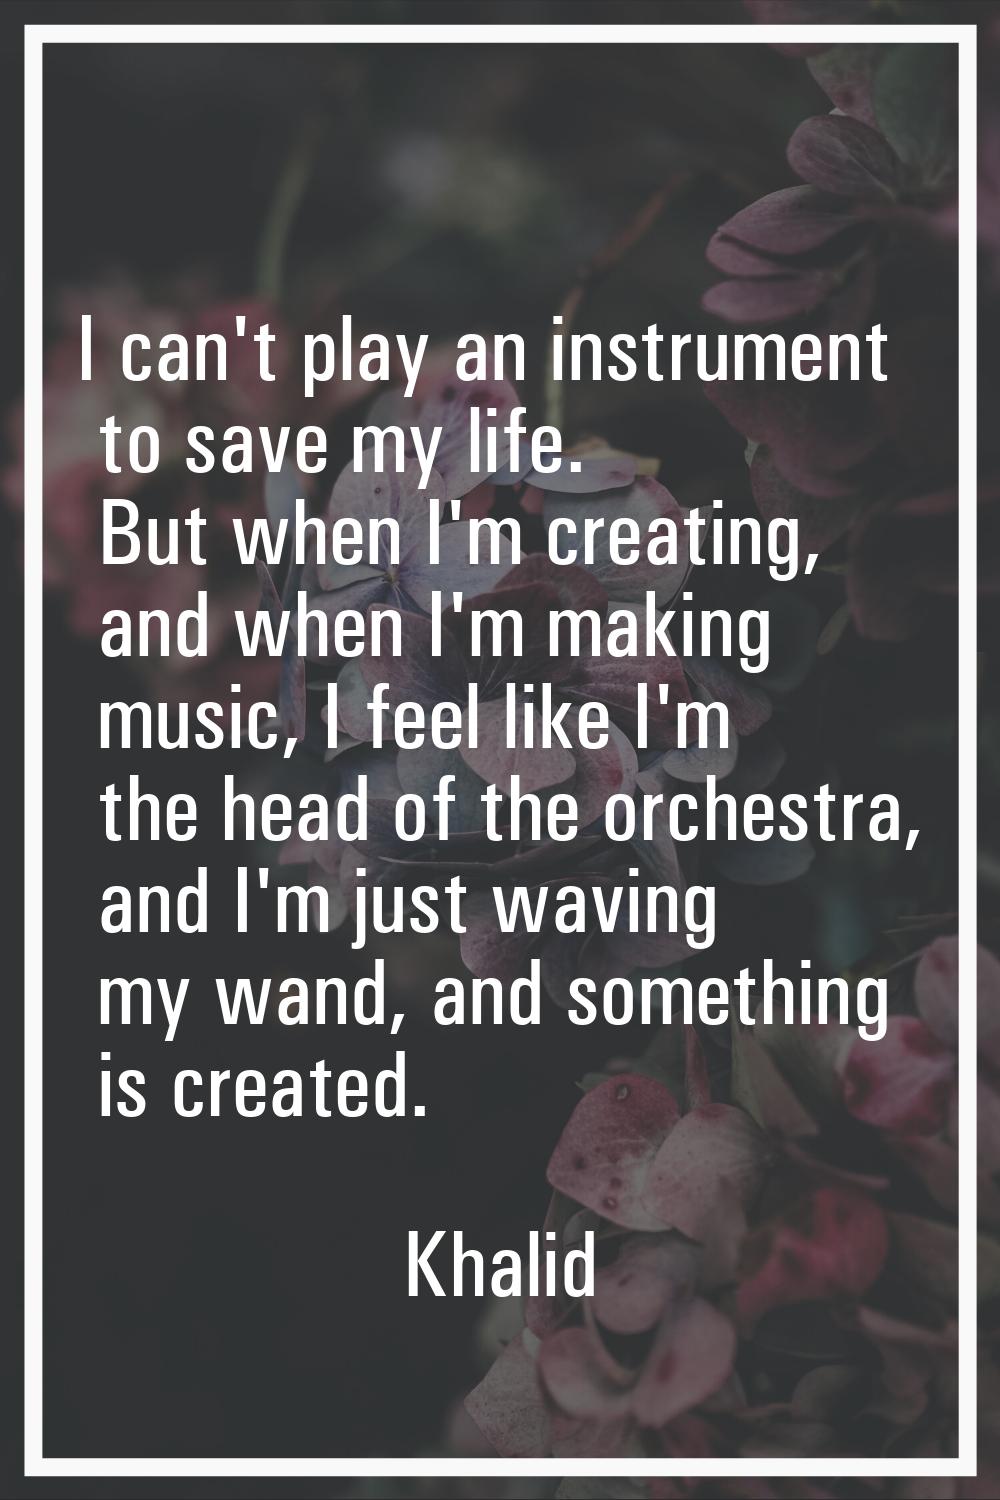 I can't play an instrument to save my life. But when I'm creating, and when I'm making music, I fee